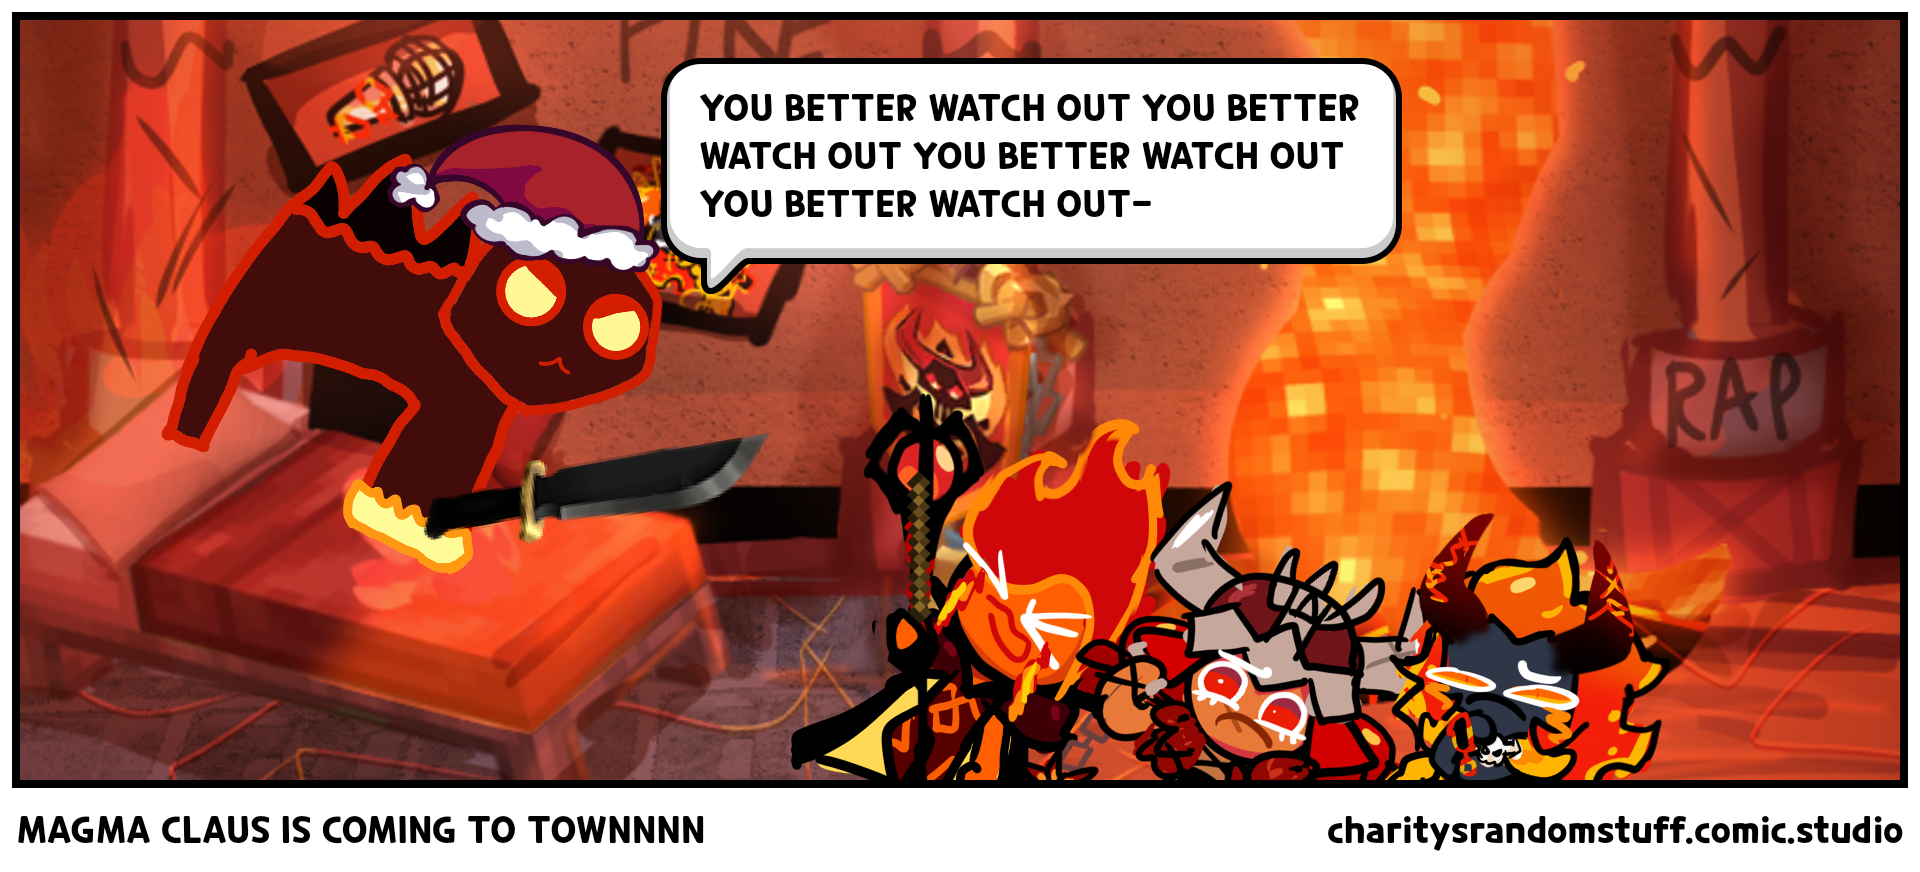 MAGMA CLAUS IS COMING TO TOWNNNN